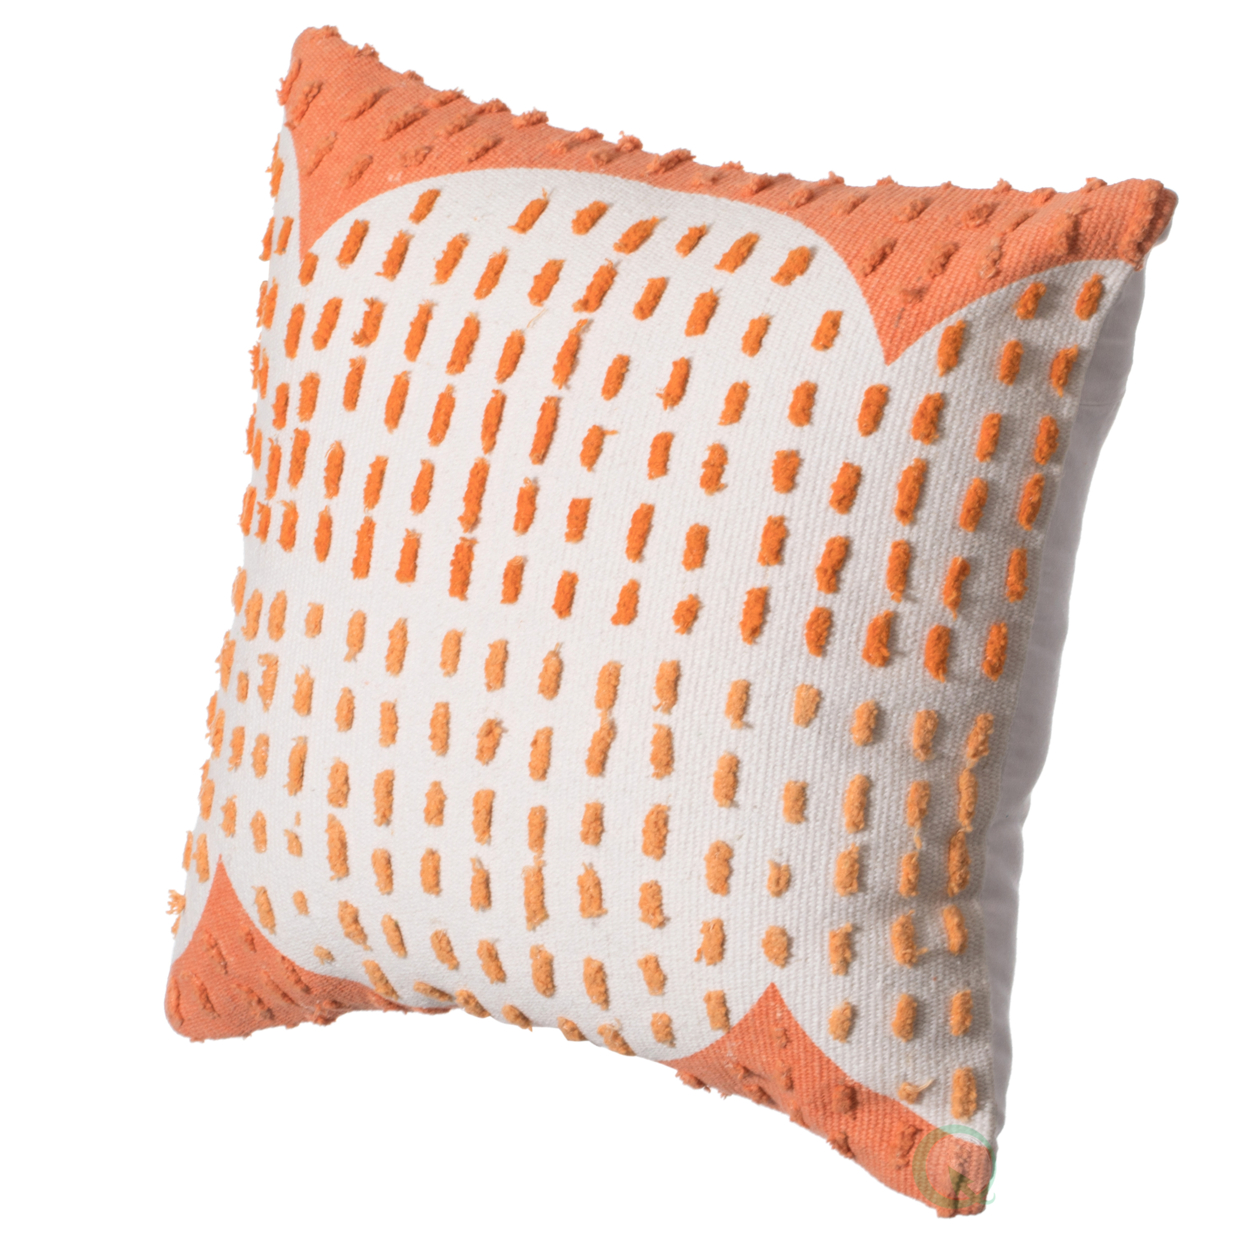 16 Handwoven Cotton Throw Pillow Cover With Ribbed Line Dots And Wave Border - Coral